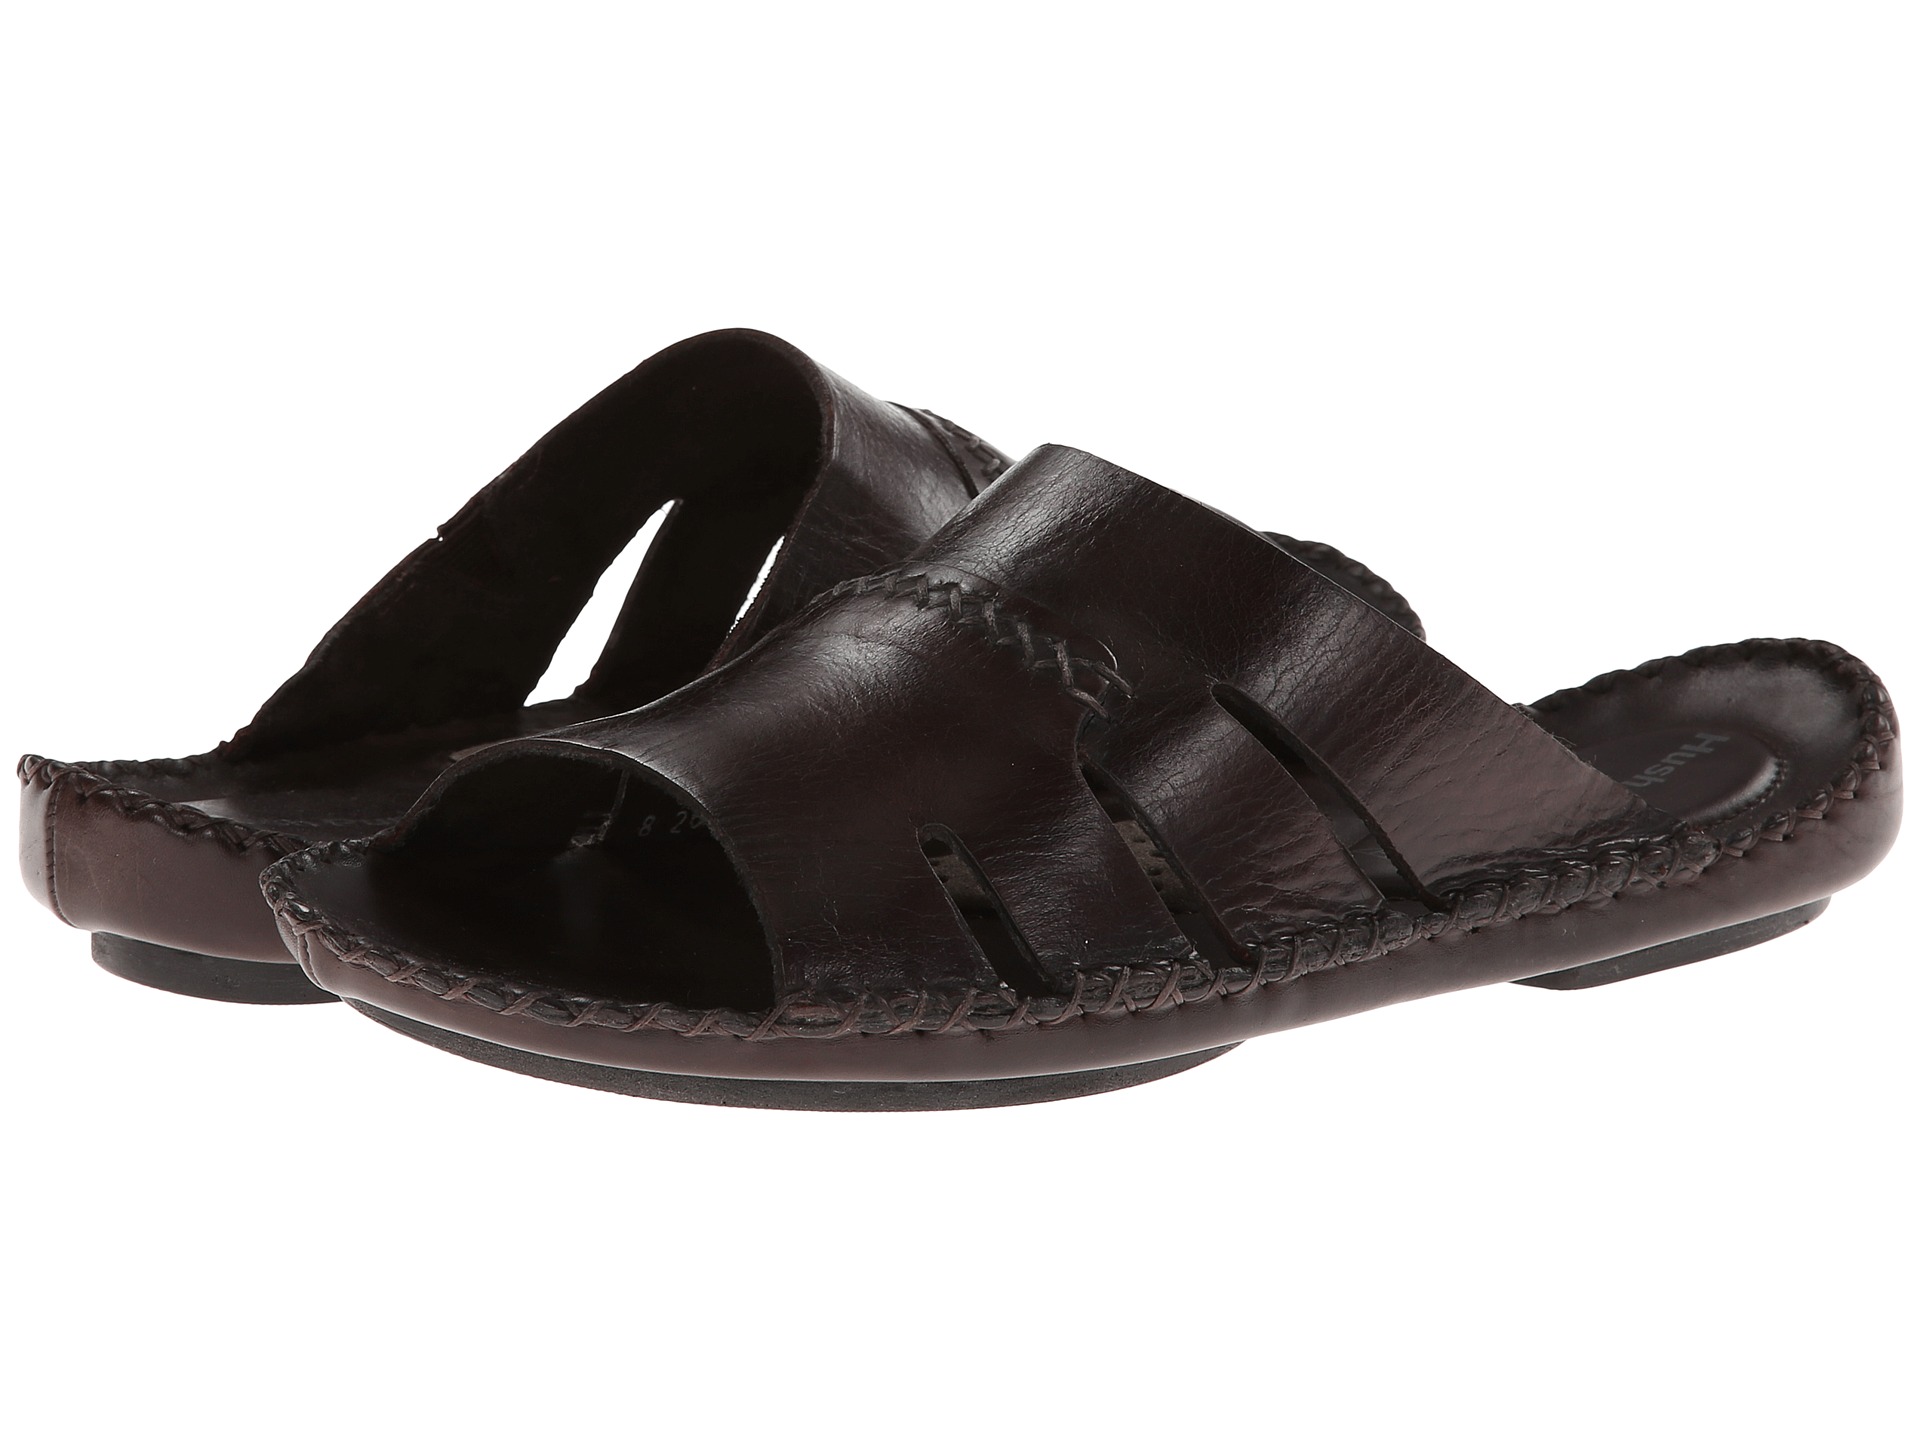 Hush Puppies Morocco Slide Ii Dark Brown Leather | Shipped Free at ...